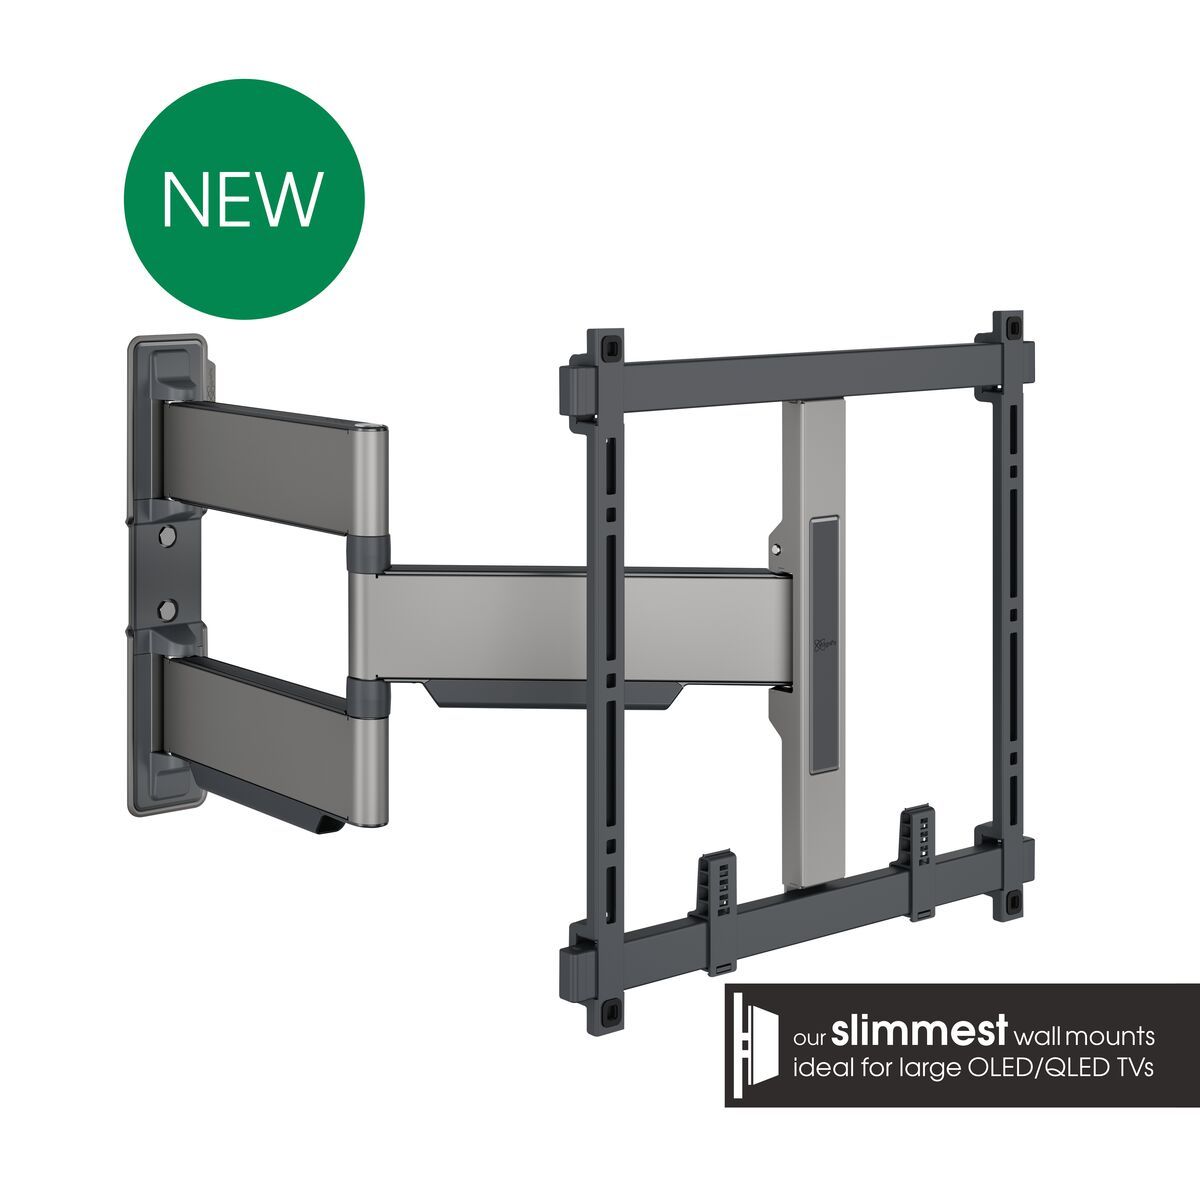 Vogel's TVM 5445 Full-Motion TV Wall Mount (black) - Suitable for 32 up to 65 inch TVs - Full motion (up to 180°) swivel - Promo